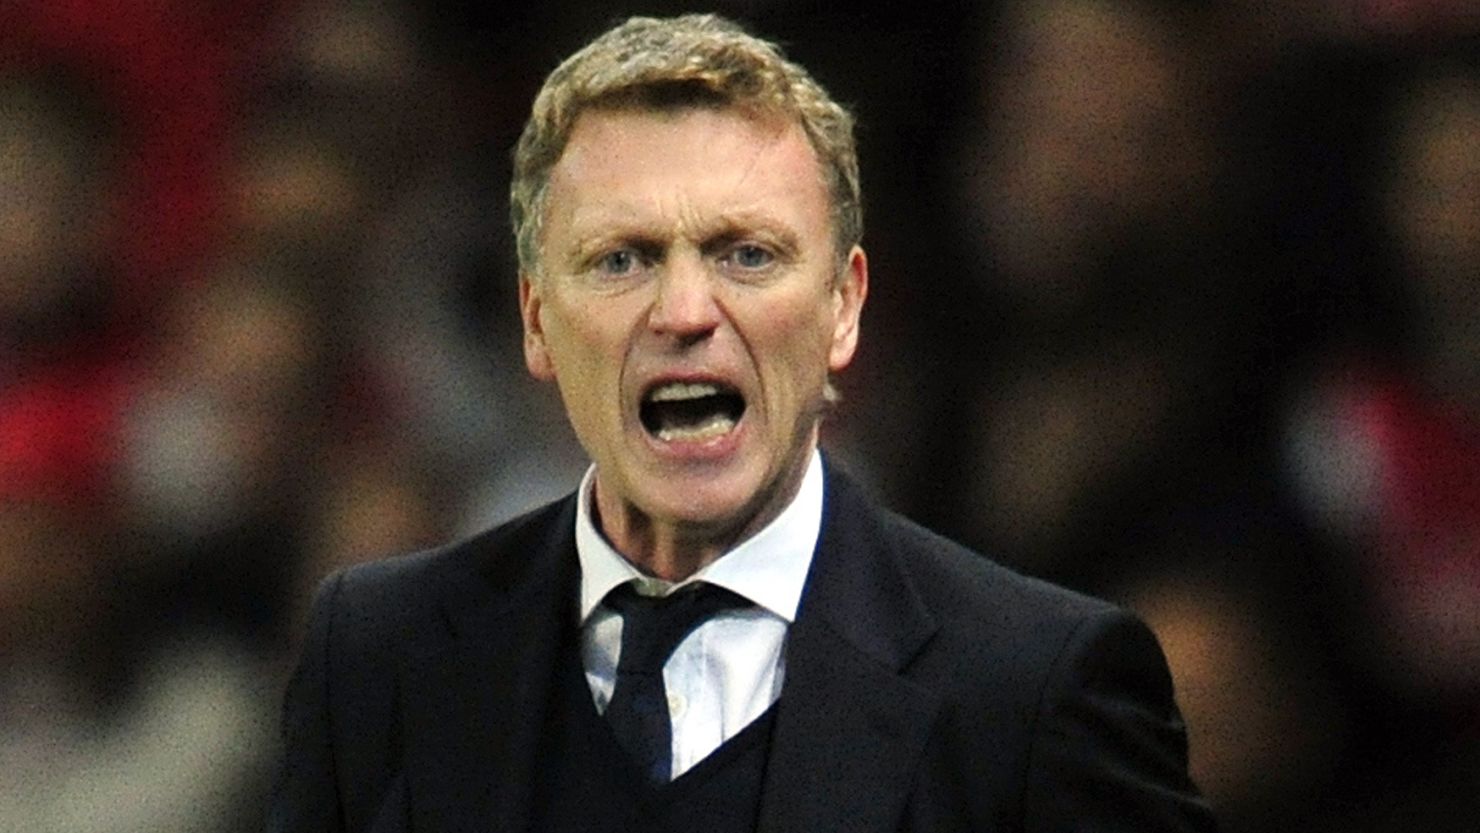 Manchester United's new manager David Moyes started work on Monday.